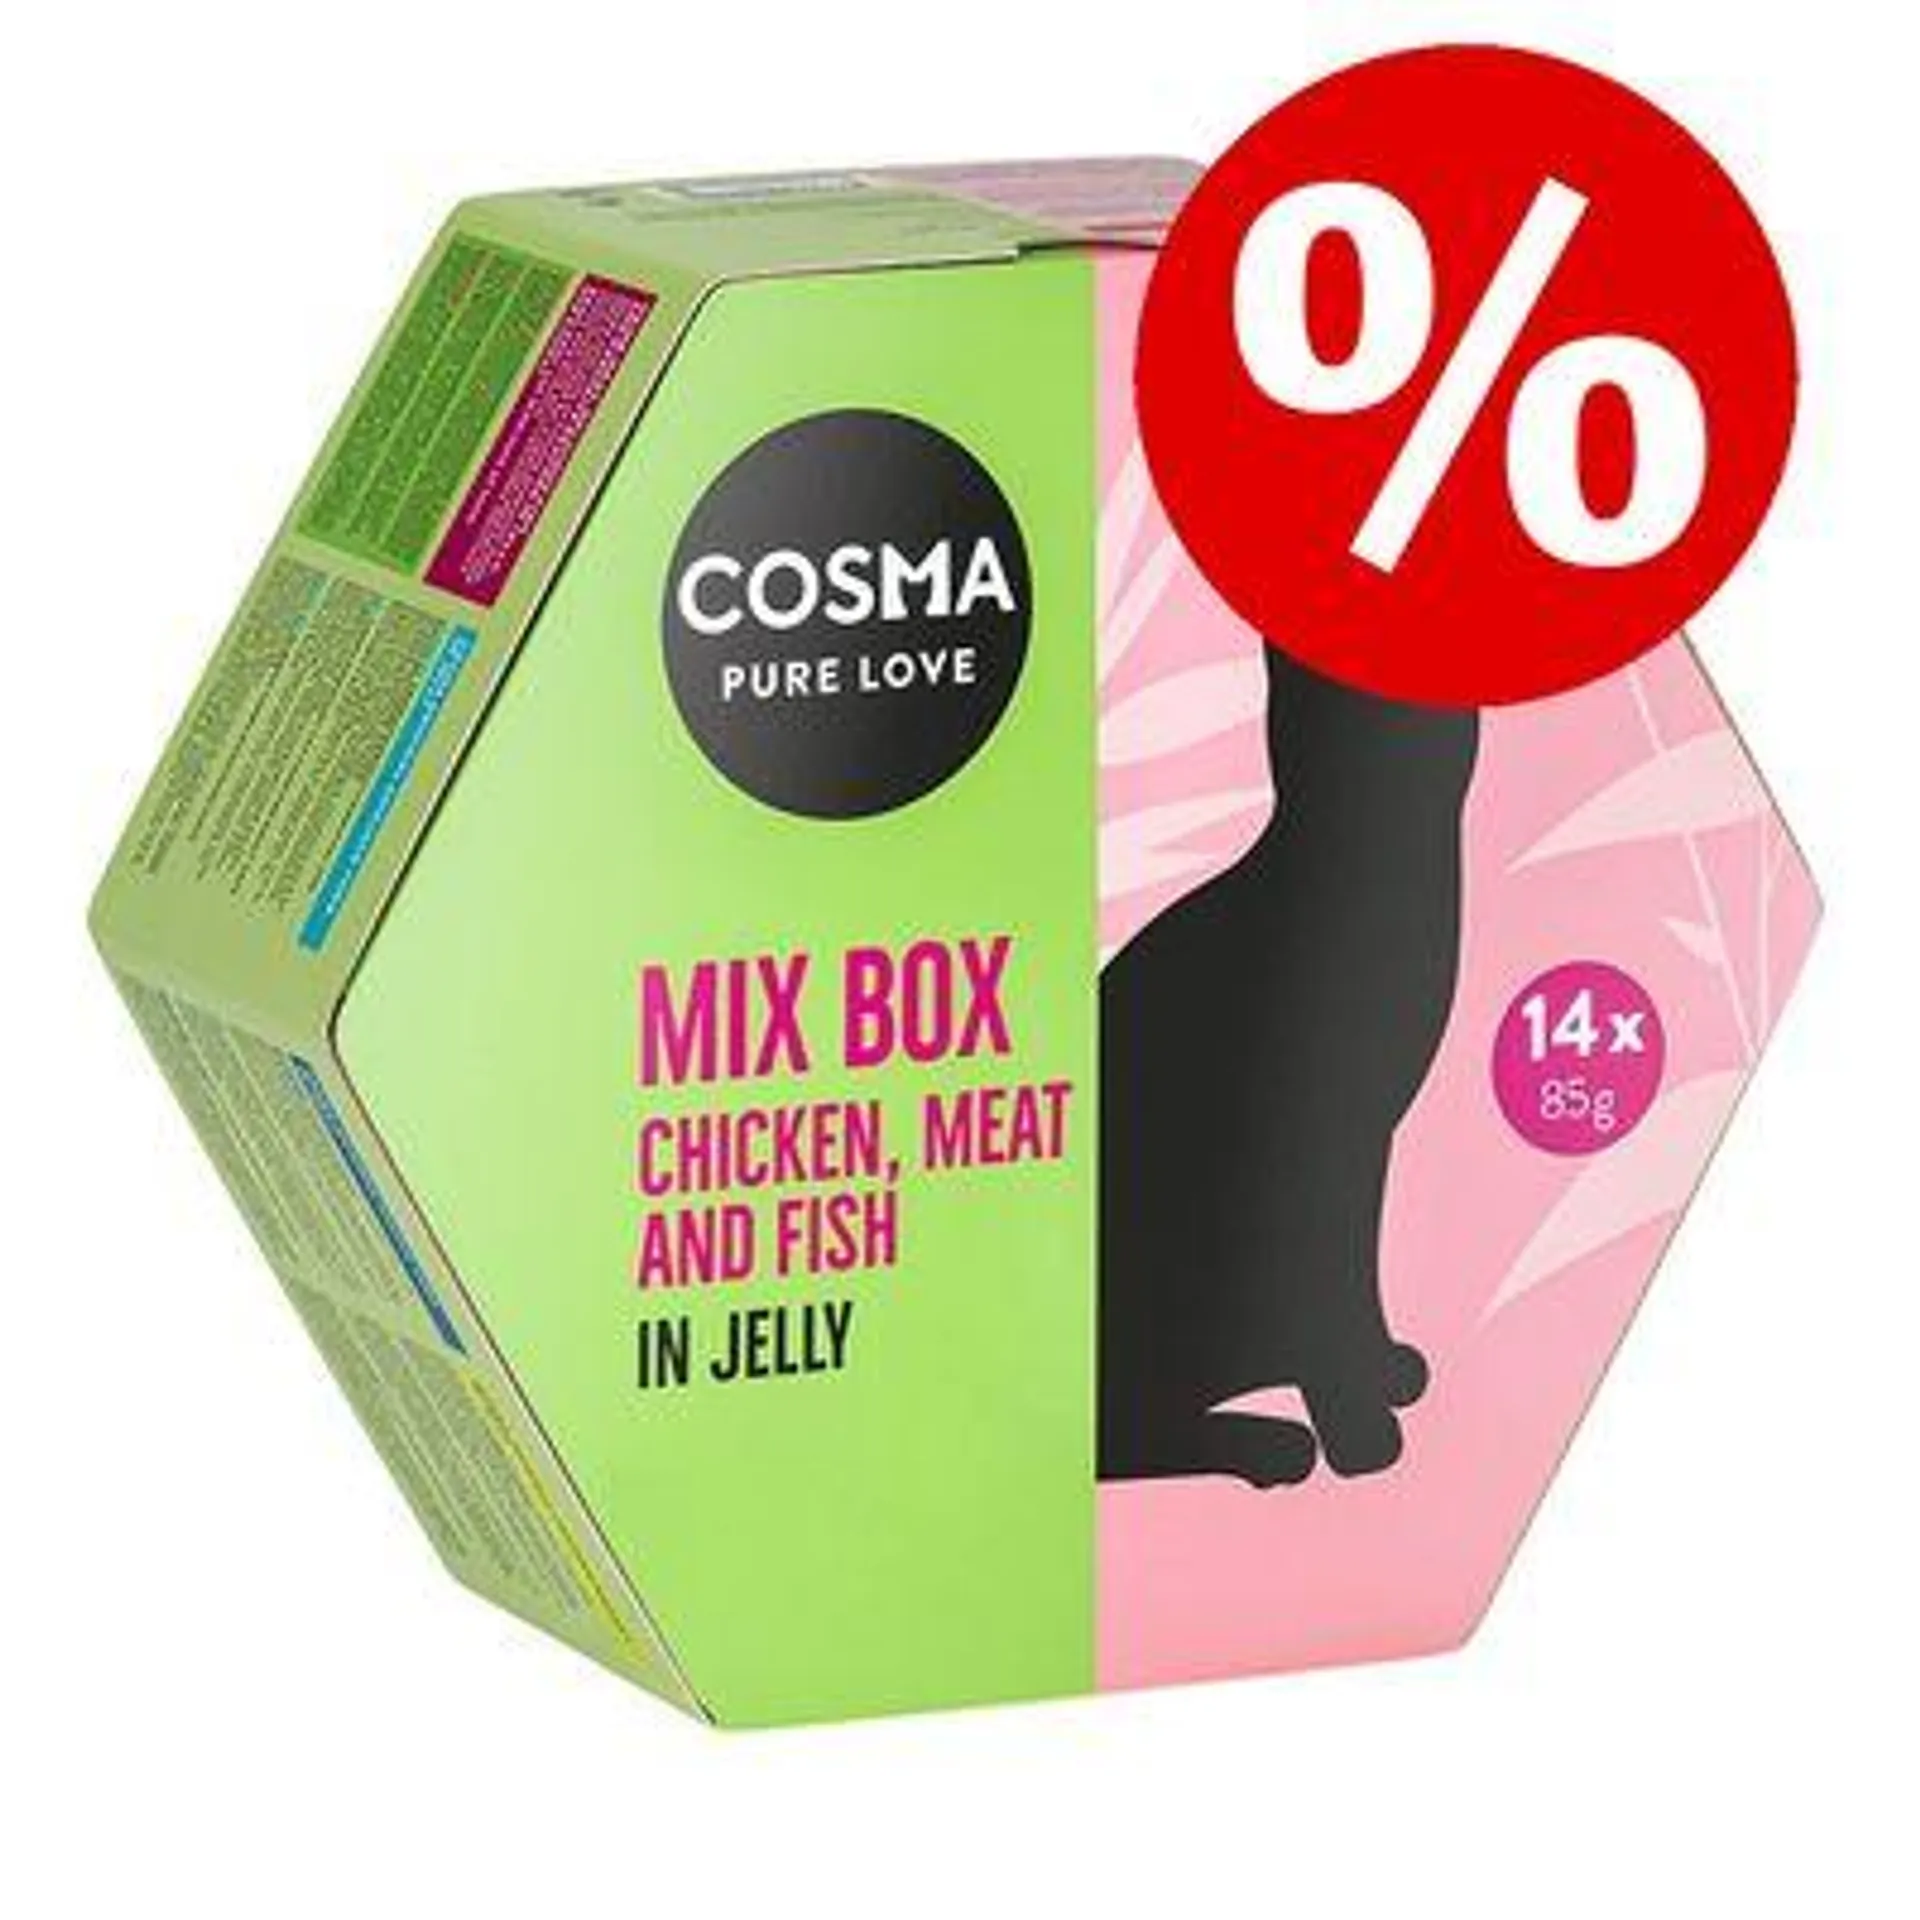 14 x 85g Cosma Mix Box Wet Cat Food - Special Price!*